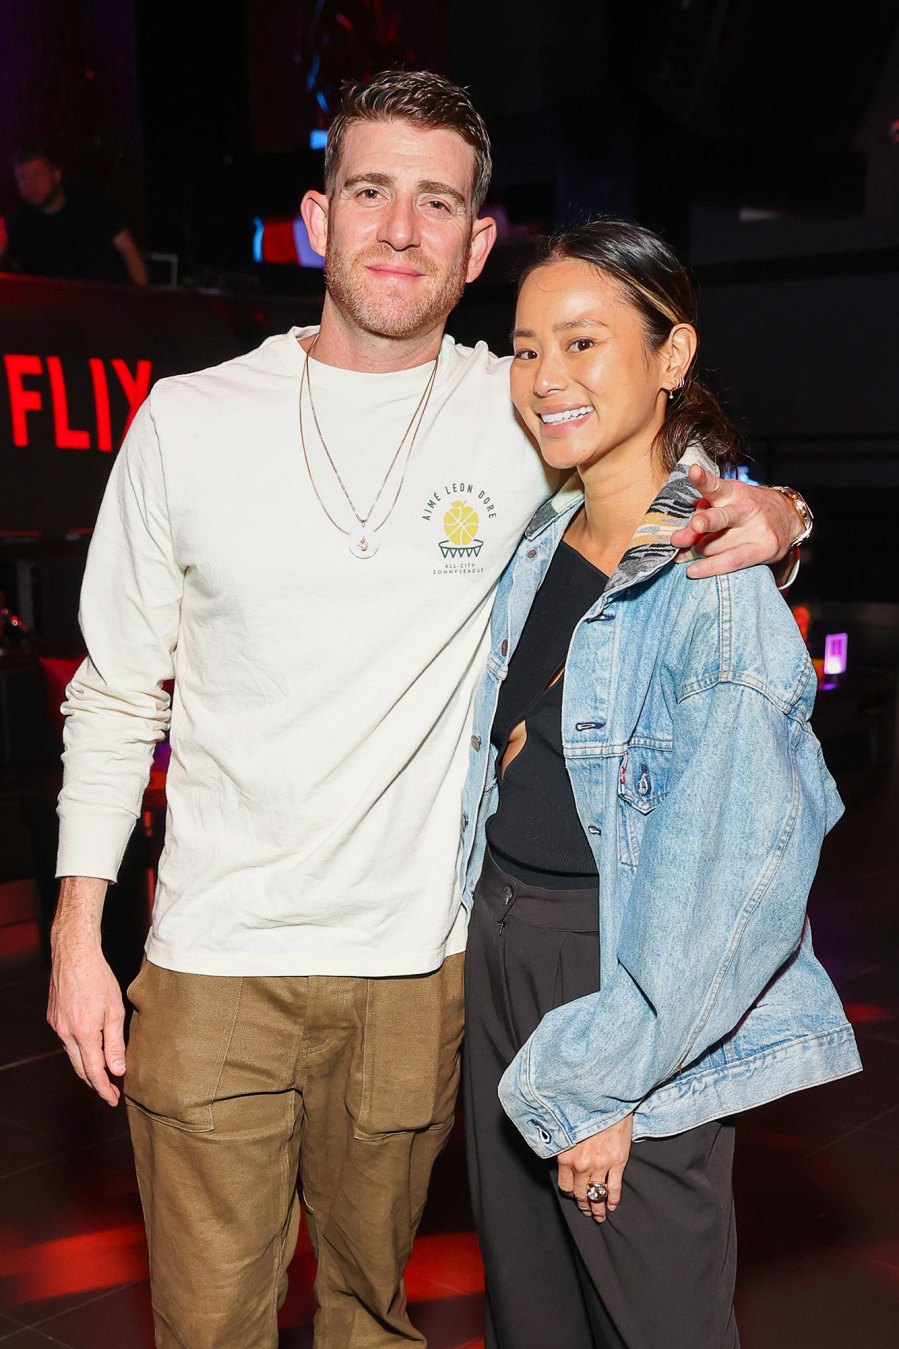 Celeb Couples Who Opened Up About Tackling Long-Distance Dating Prince Harry Meghan Markle and More GettyImages-1428696155 Bryan Greenberg and Jamie Chung